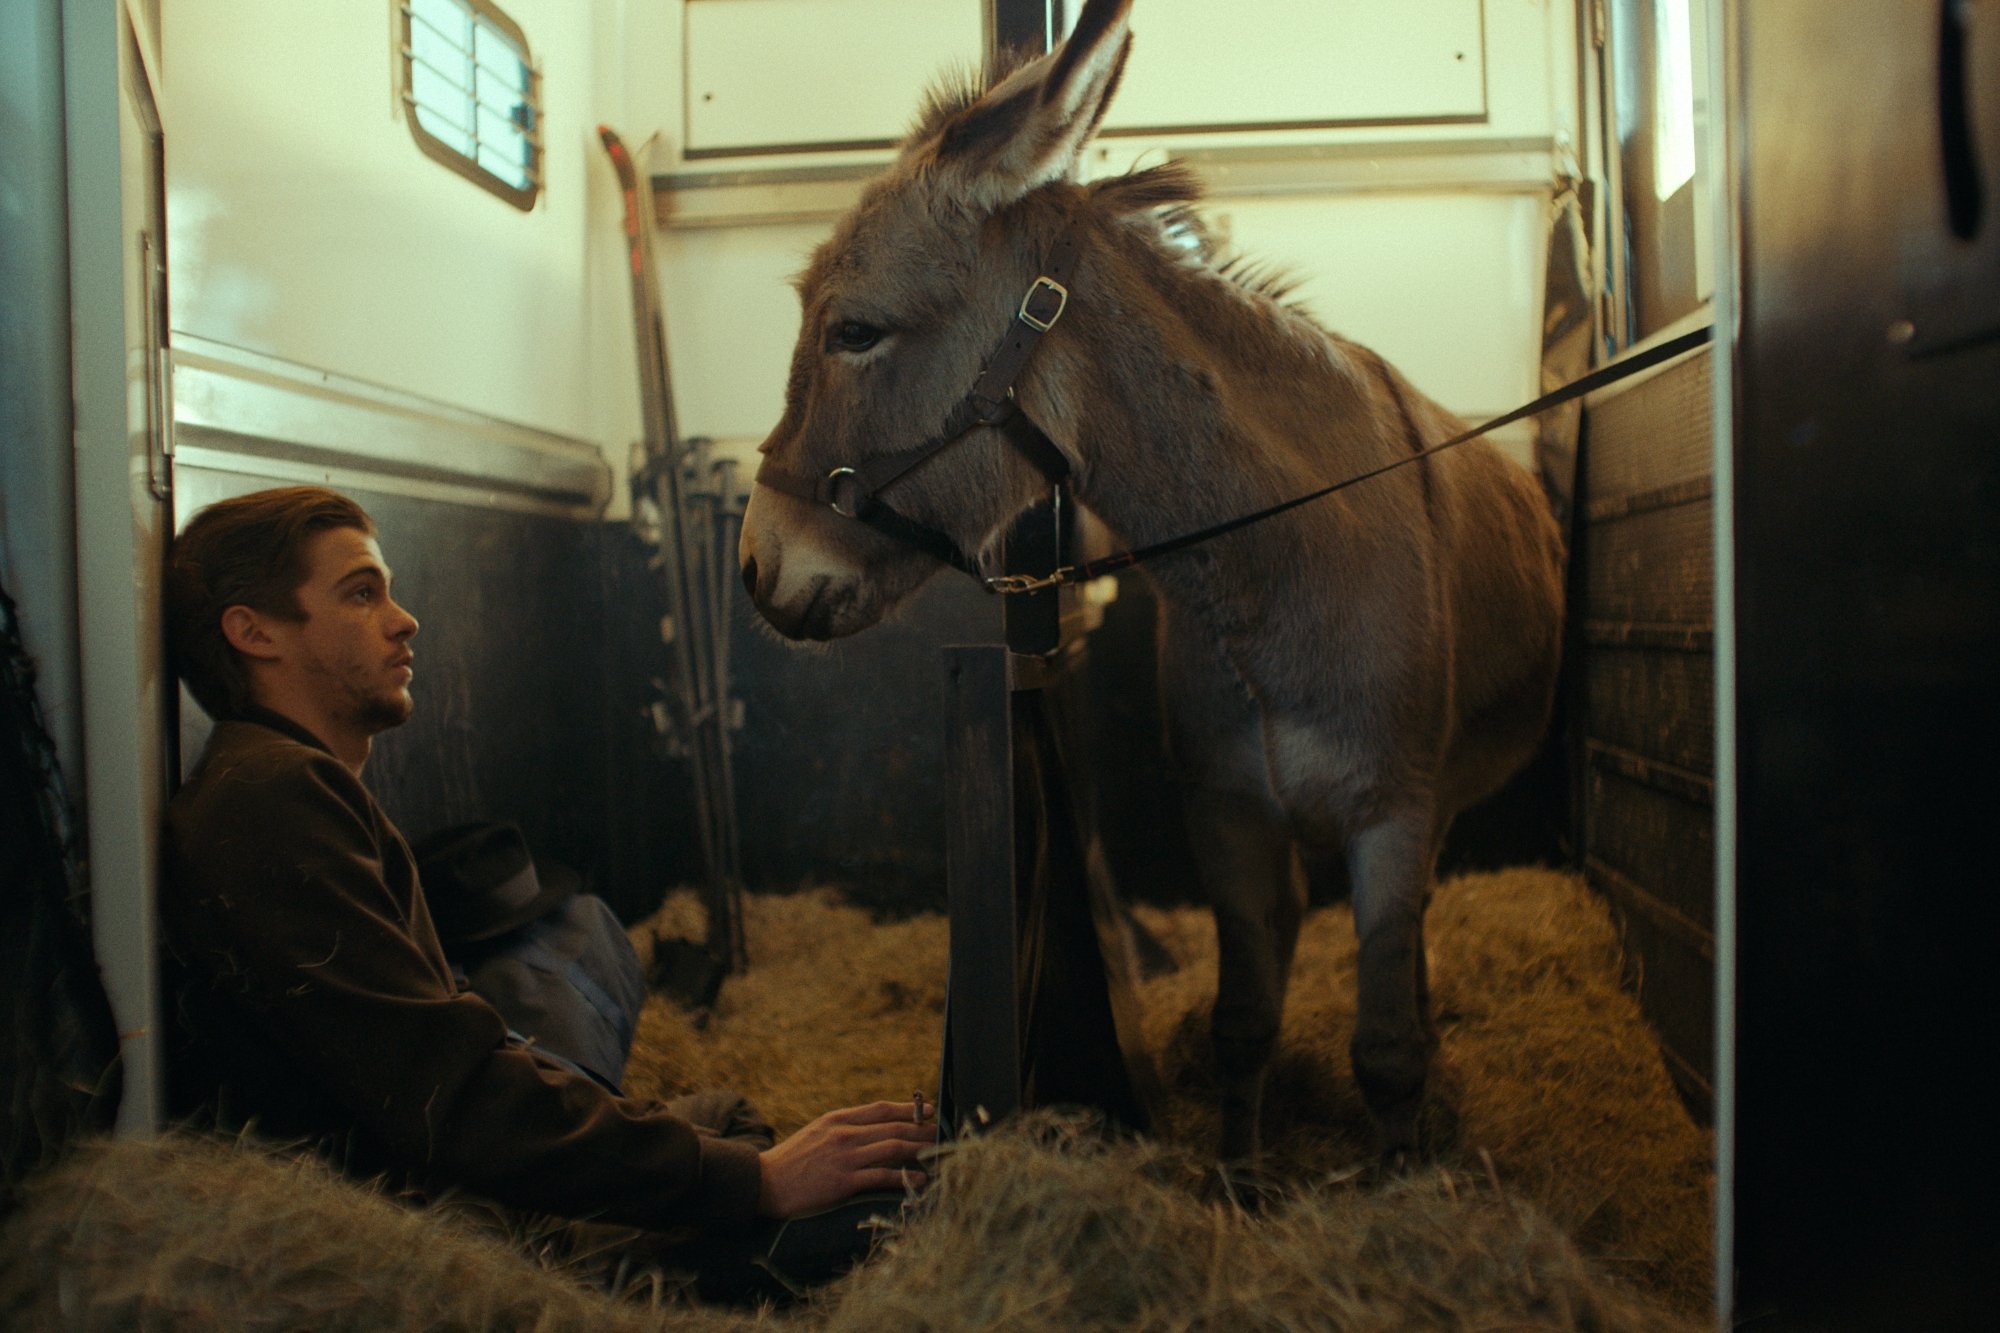 'EO' Lorenzo Zurzolo as Vito and EO sitting in a stall. Zurzolo is sitting on the ground in the hay, while EO looks at him.